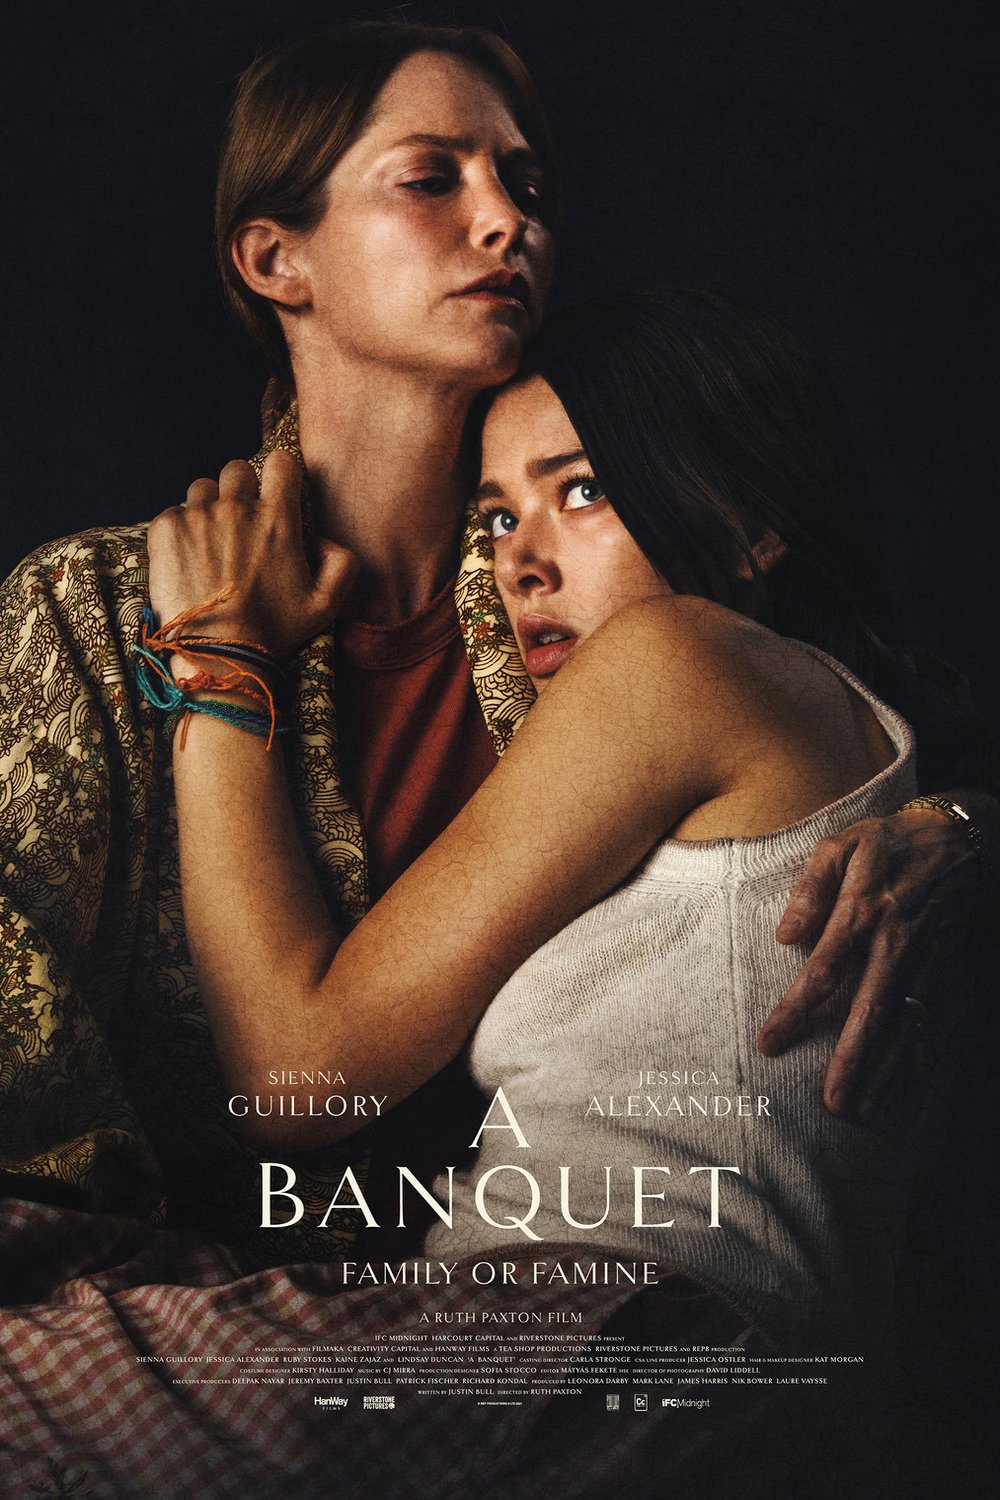 Poster of the movie A Banquet